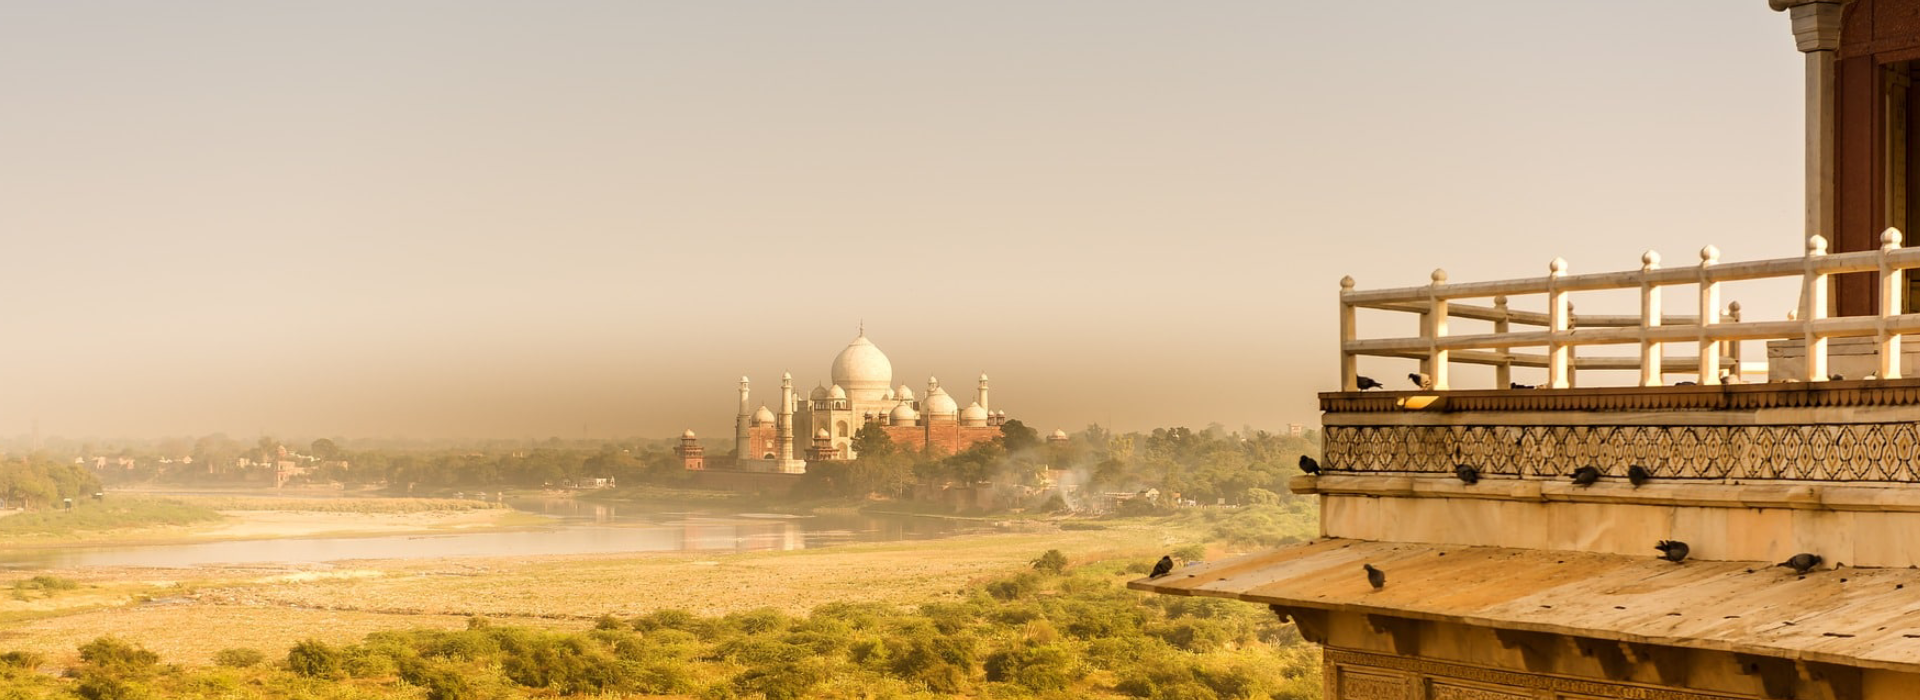 From Delhi: Day Trip to Taj Mahal and Agra Fort – By Car